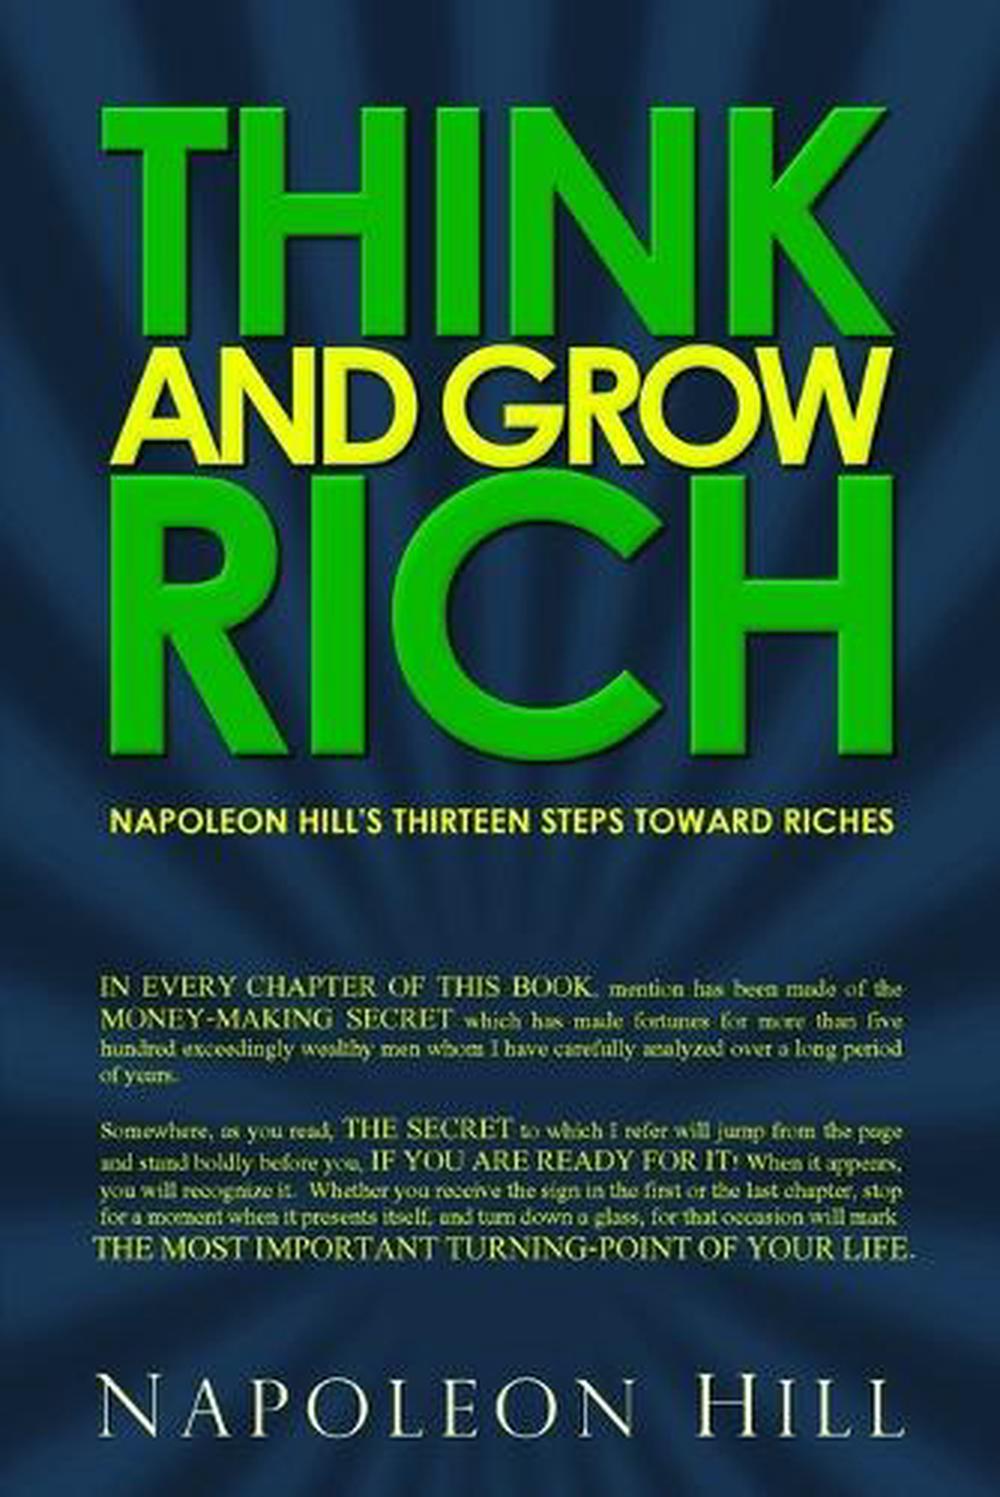 Рич книги. Think and grow Rich книга. Napoleon Hill think and grow Rich book. Наполеон Хилл книги. Think and grow Rich Cover book.